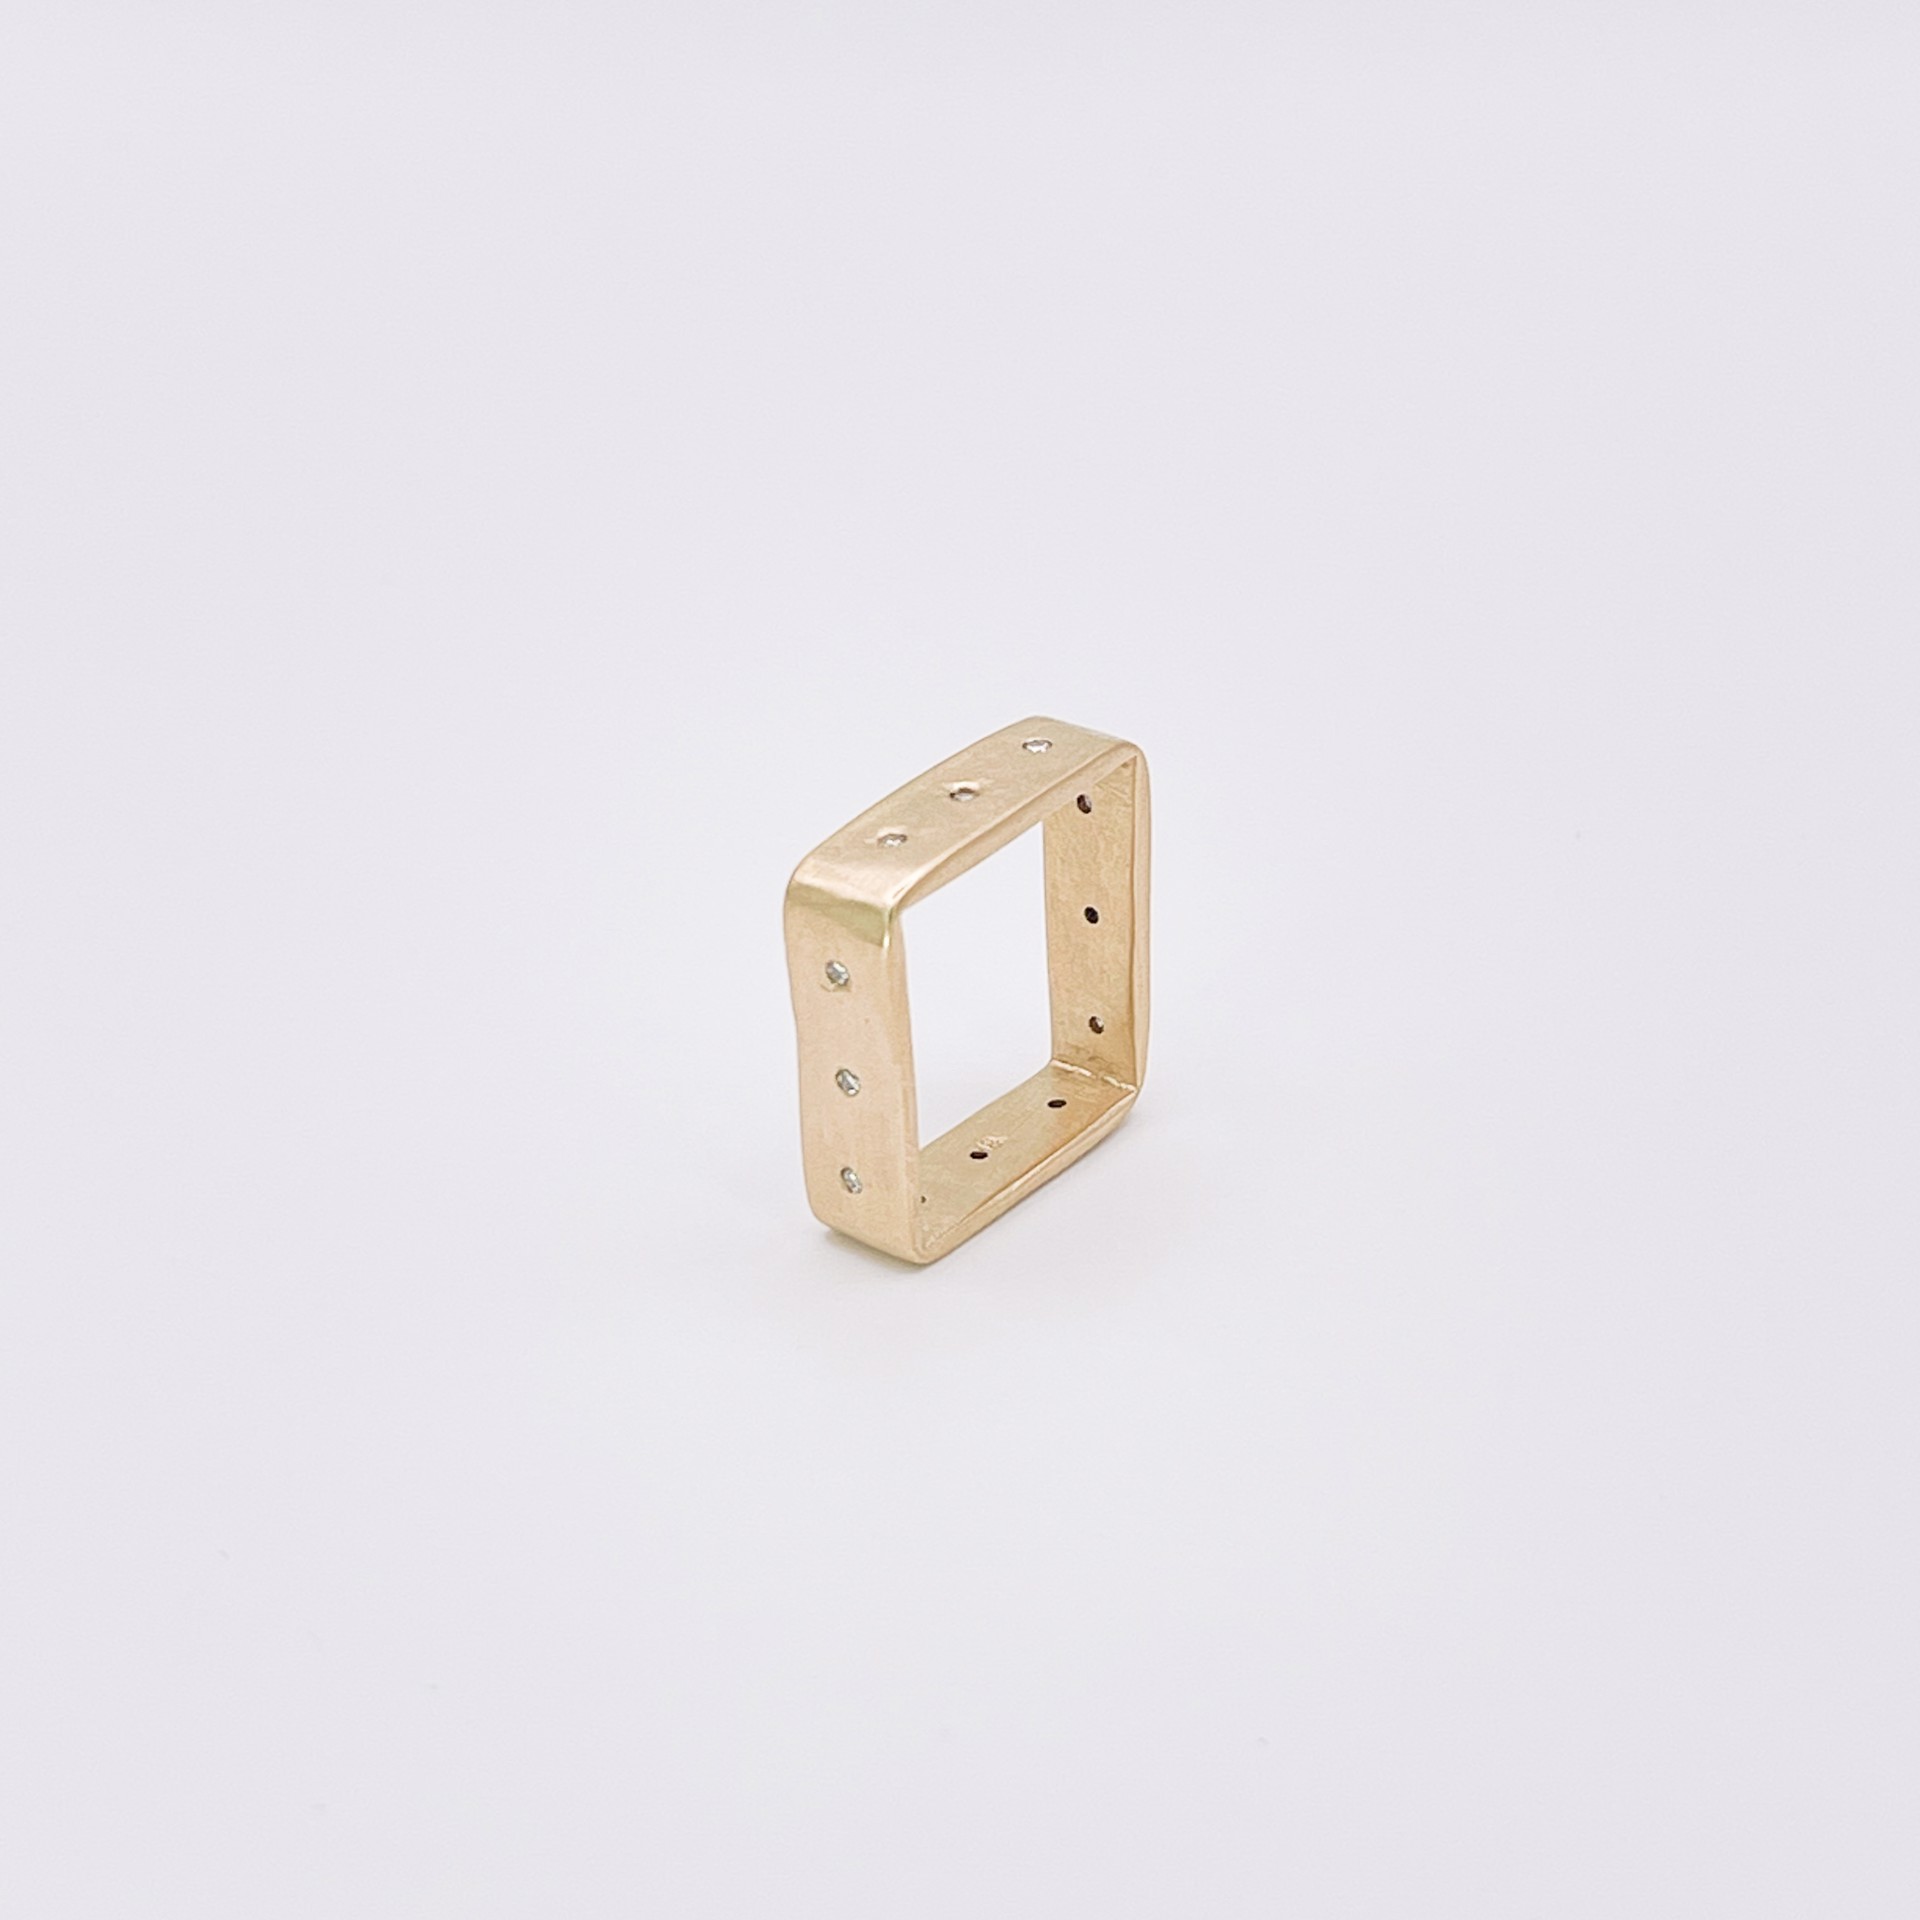 LHR02- Square ring with 12 diamonds 18k gold by Leandra Hill